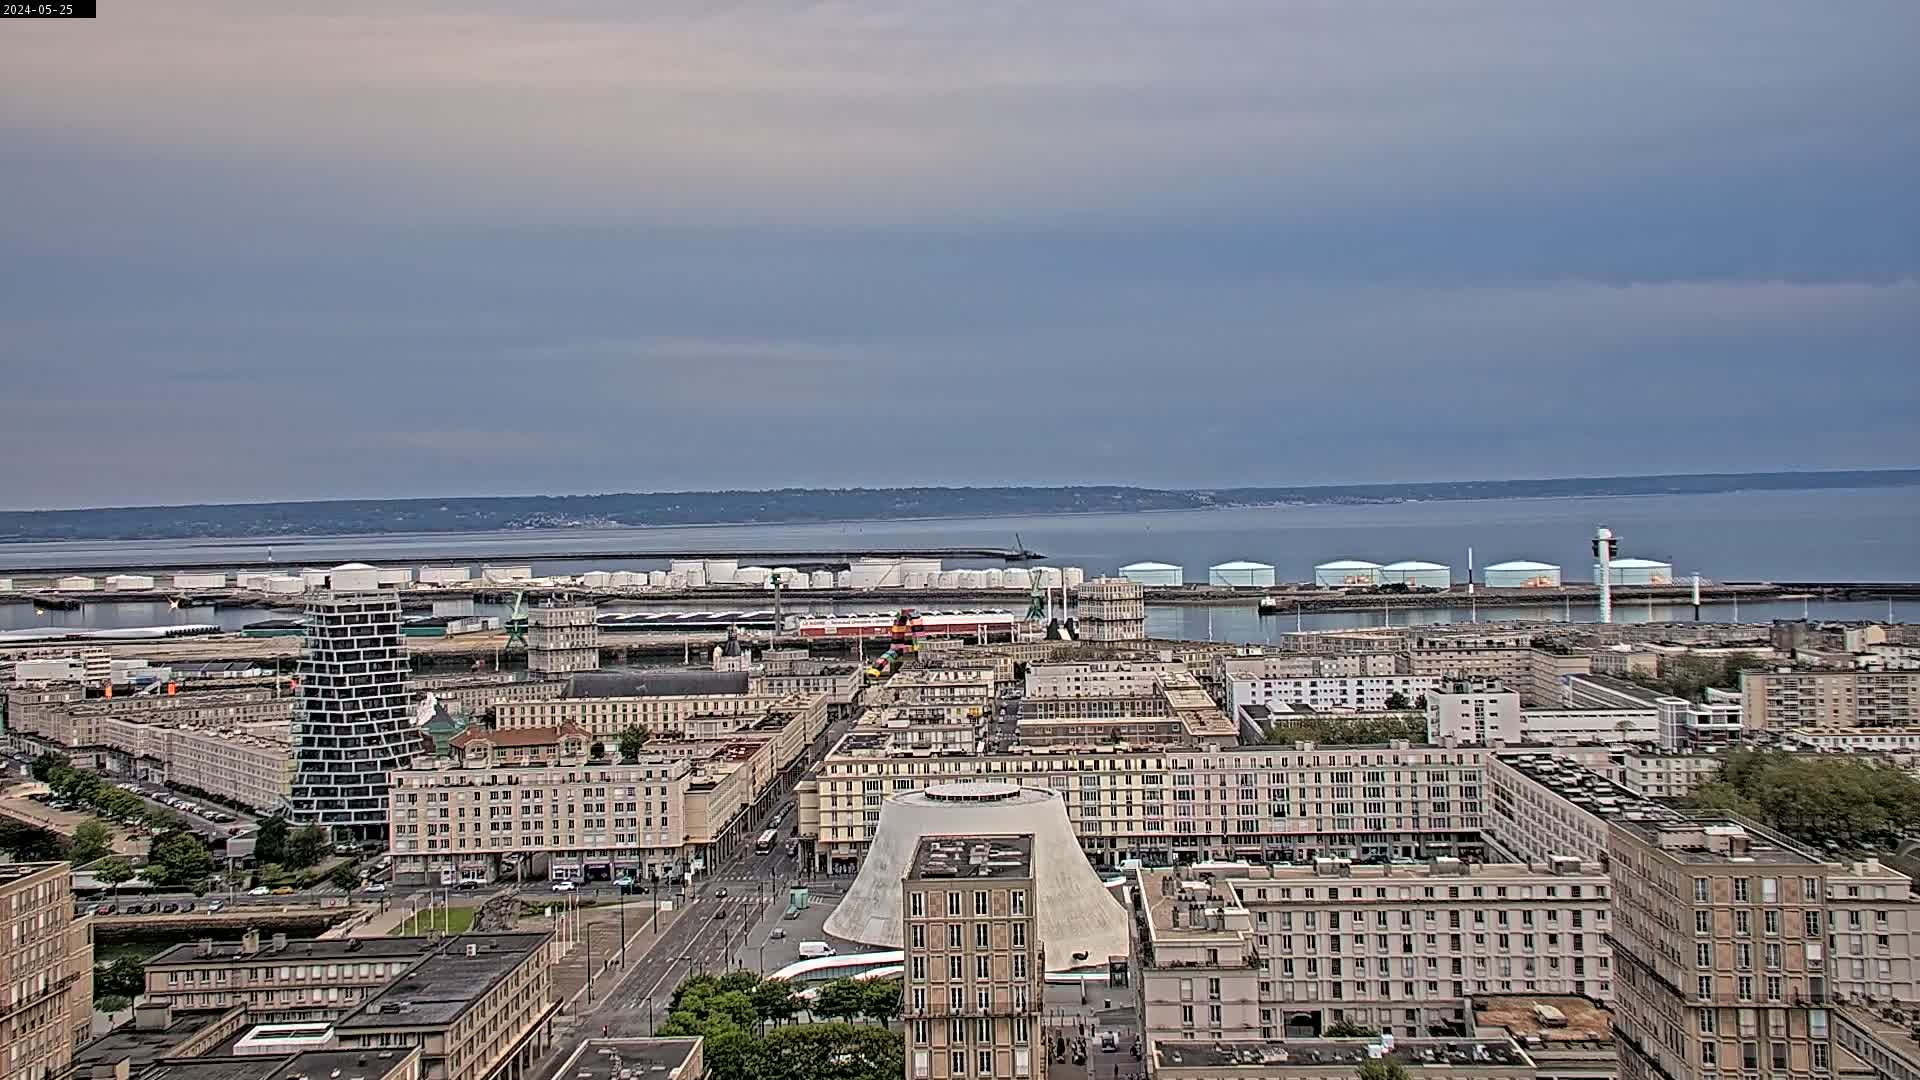 Le Havre Do. 21:10